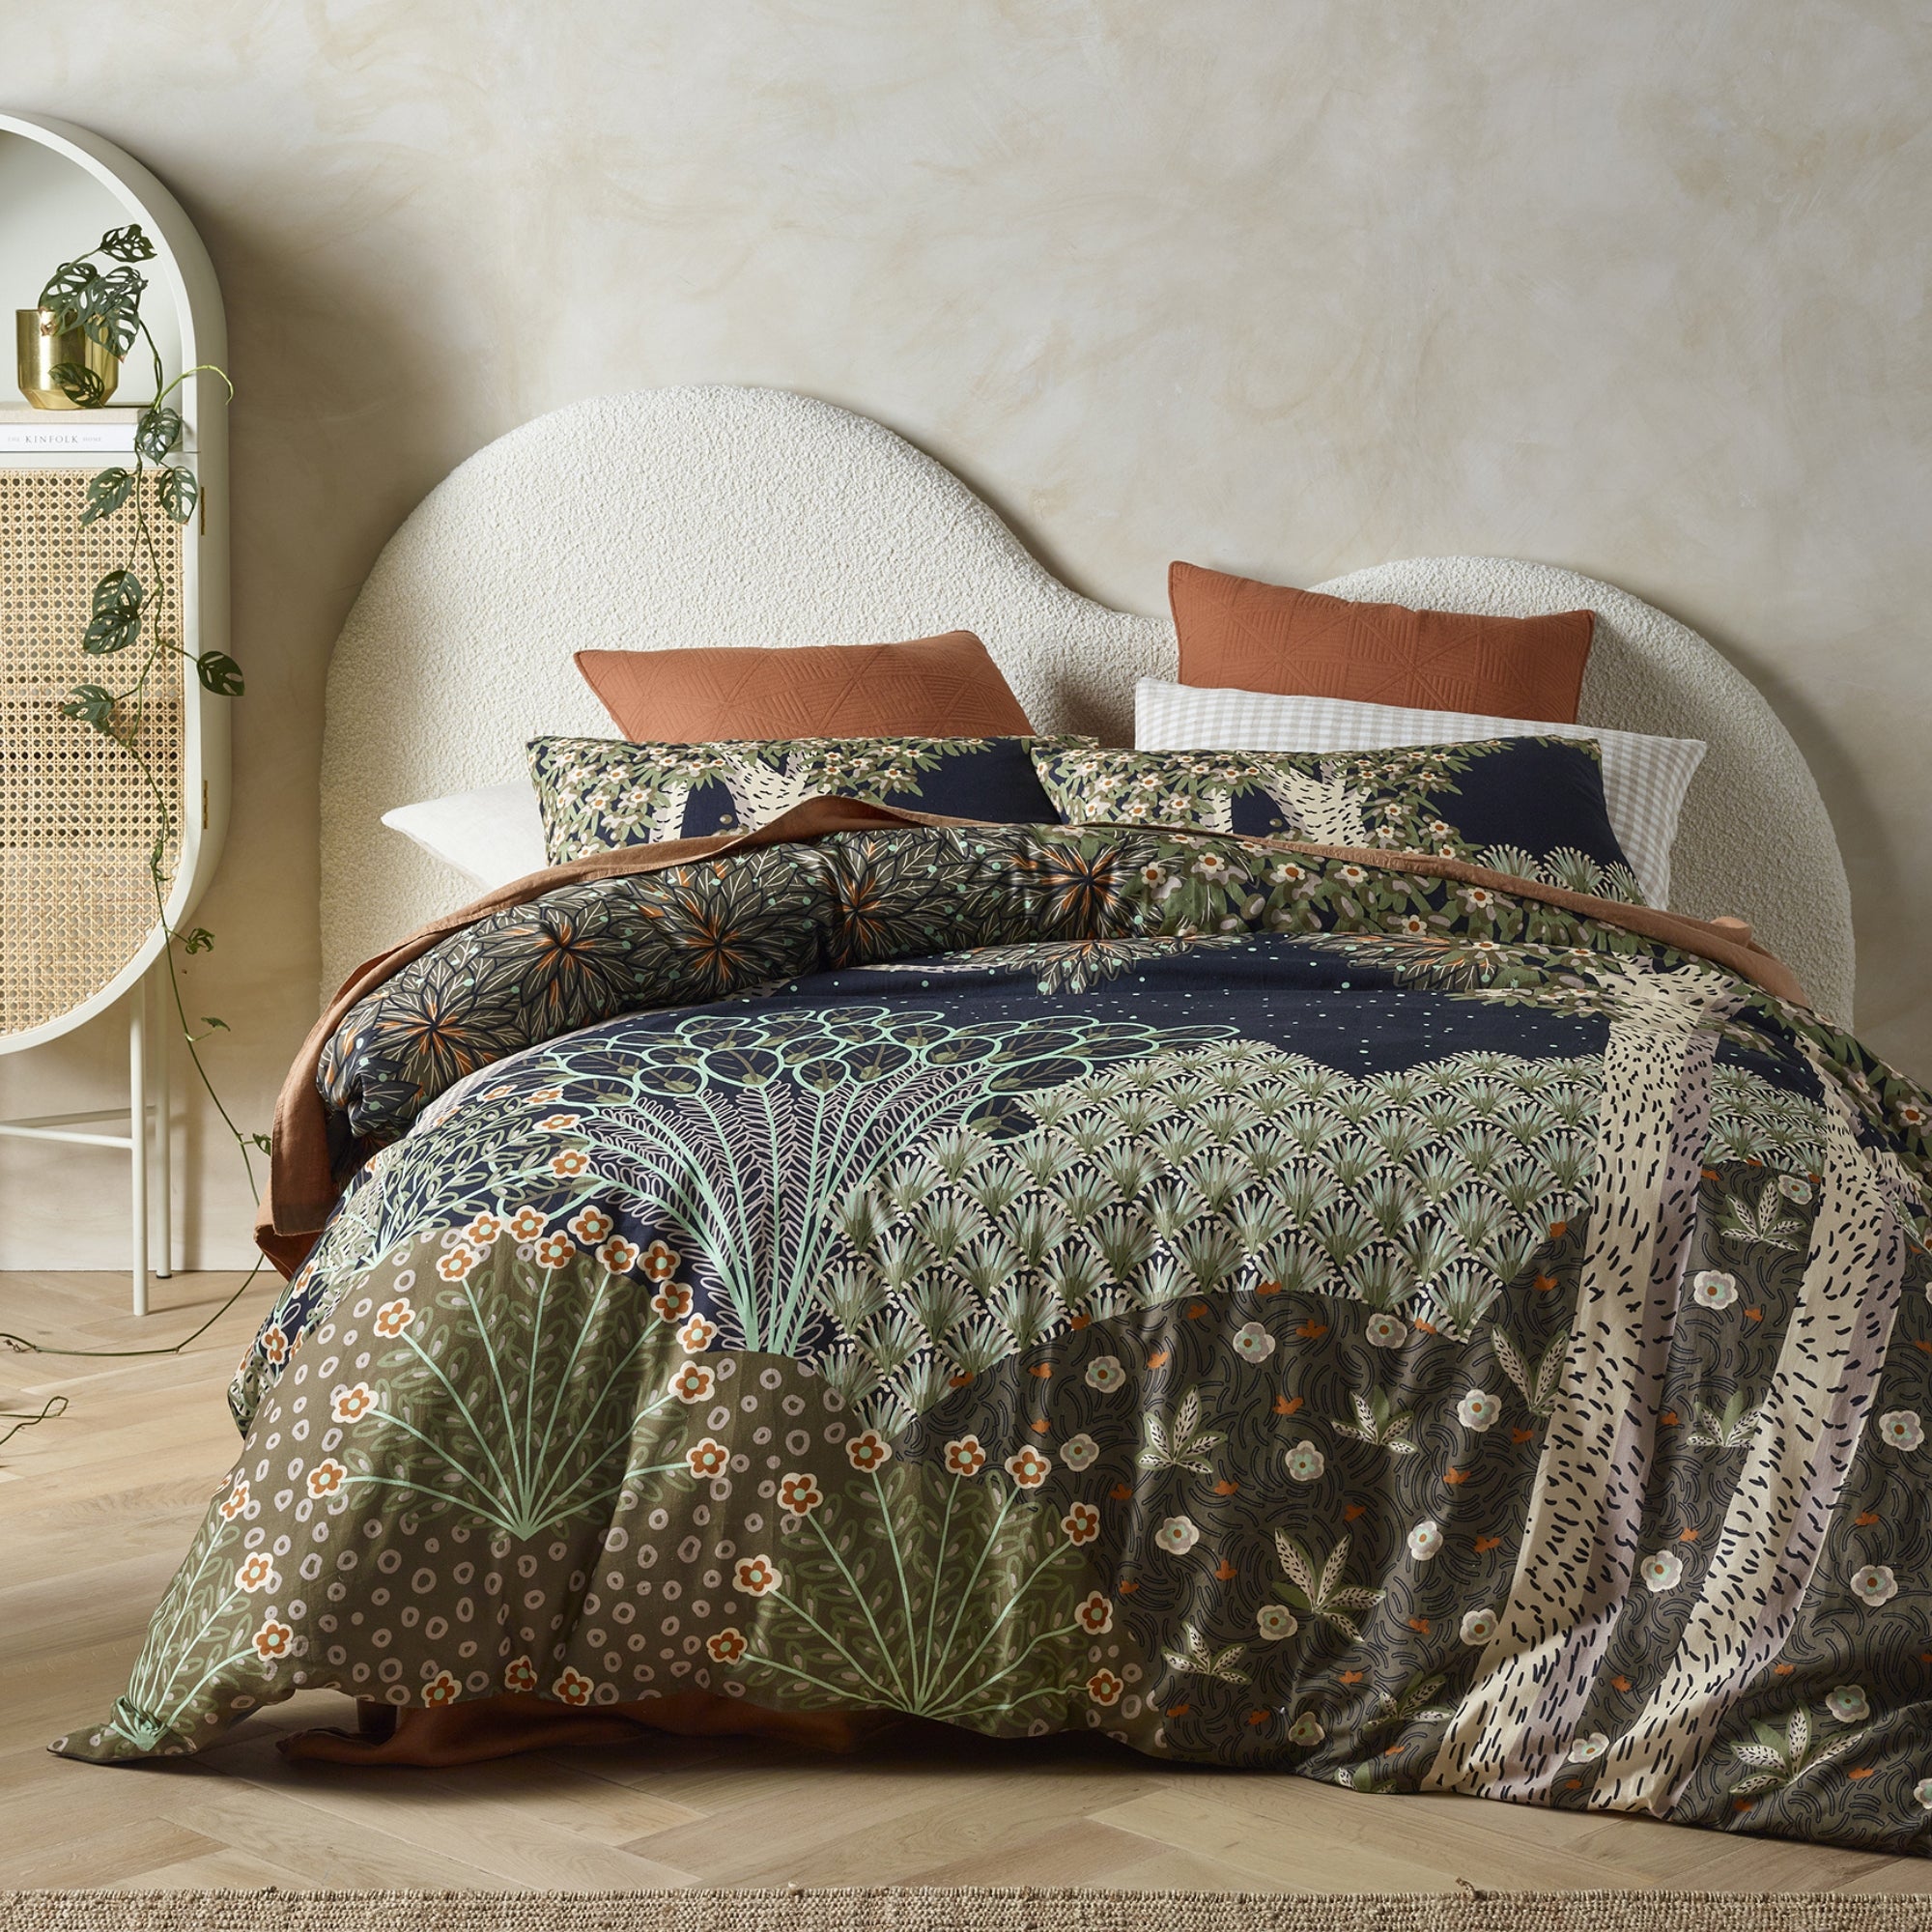 Stylish Twilight Forest Bloom King Quilt Cover Set in a contemporary bedroom, enhancing the room's natural aesthetic